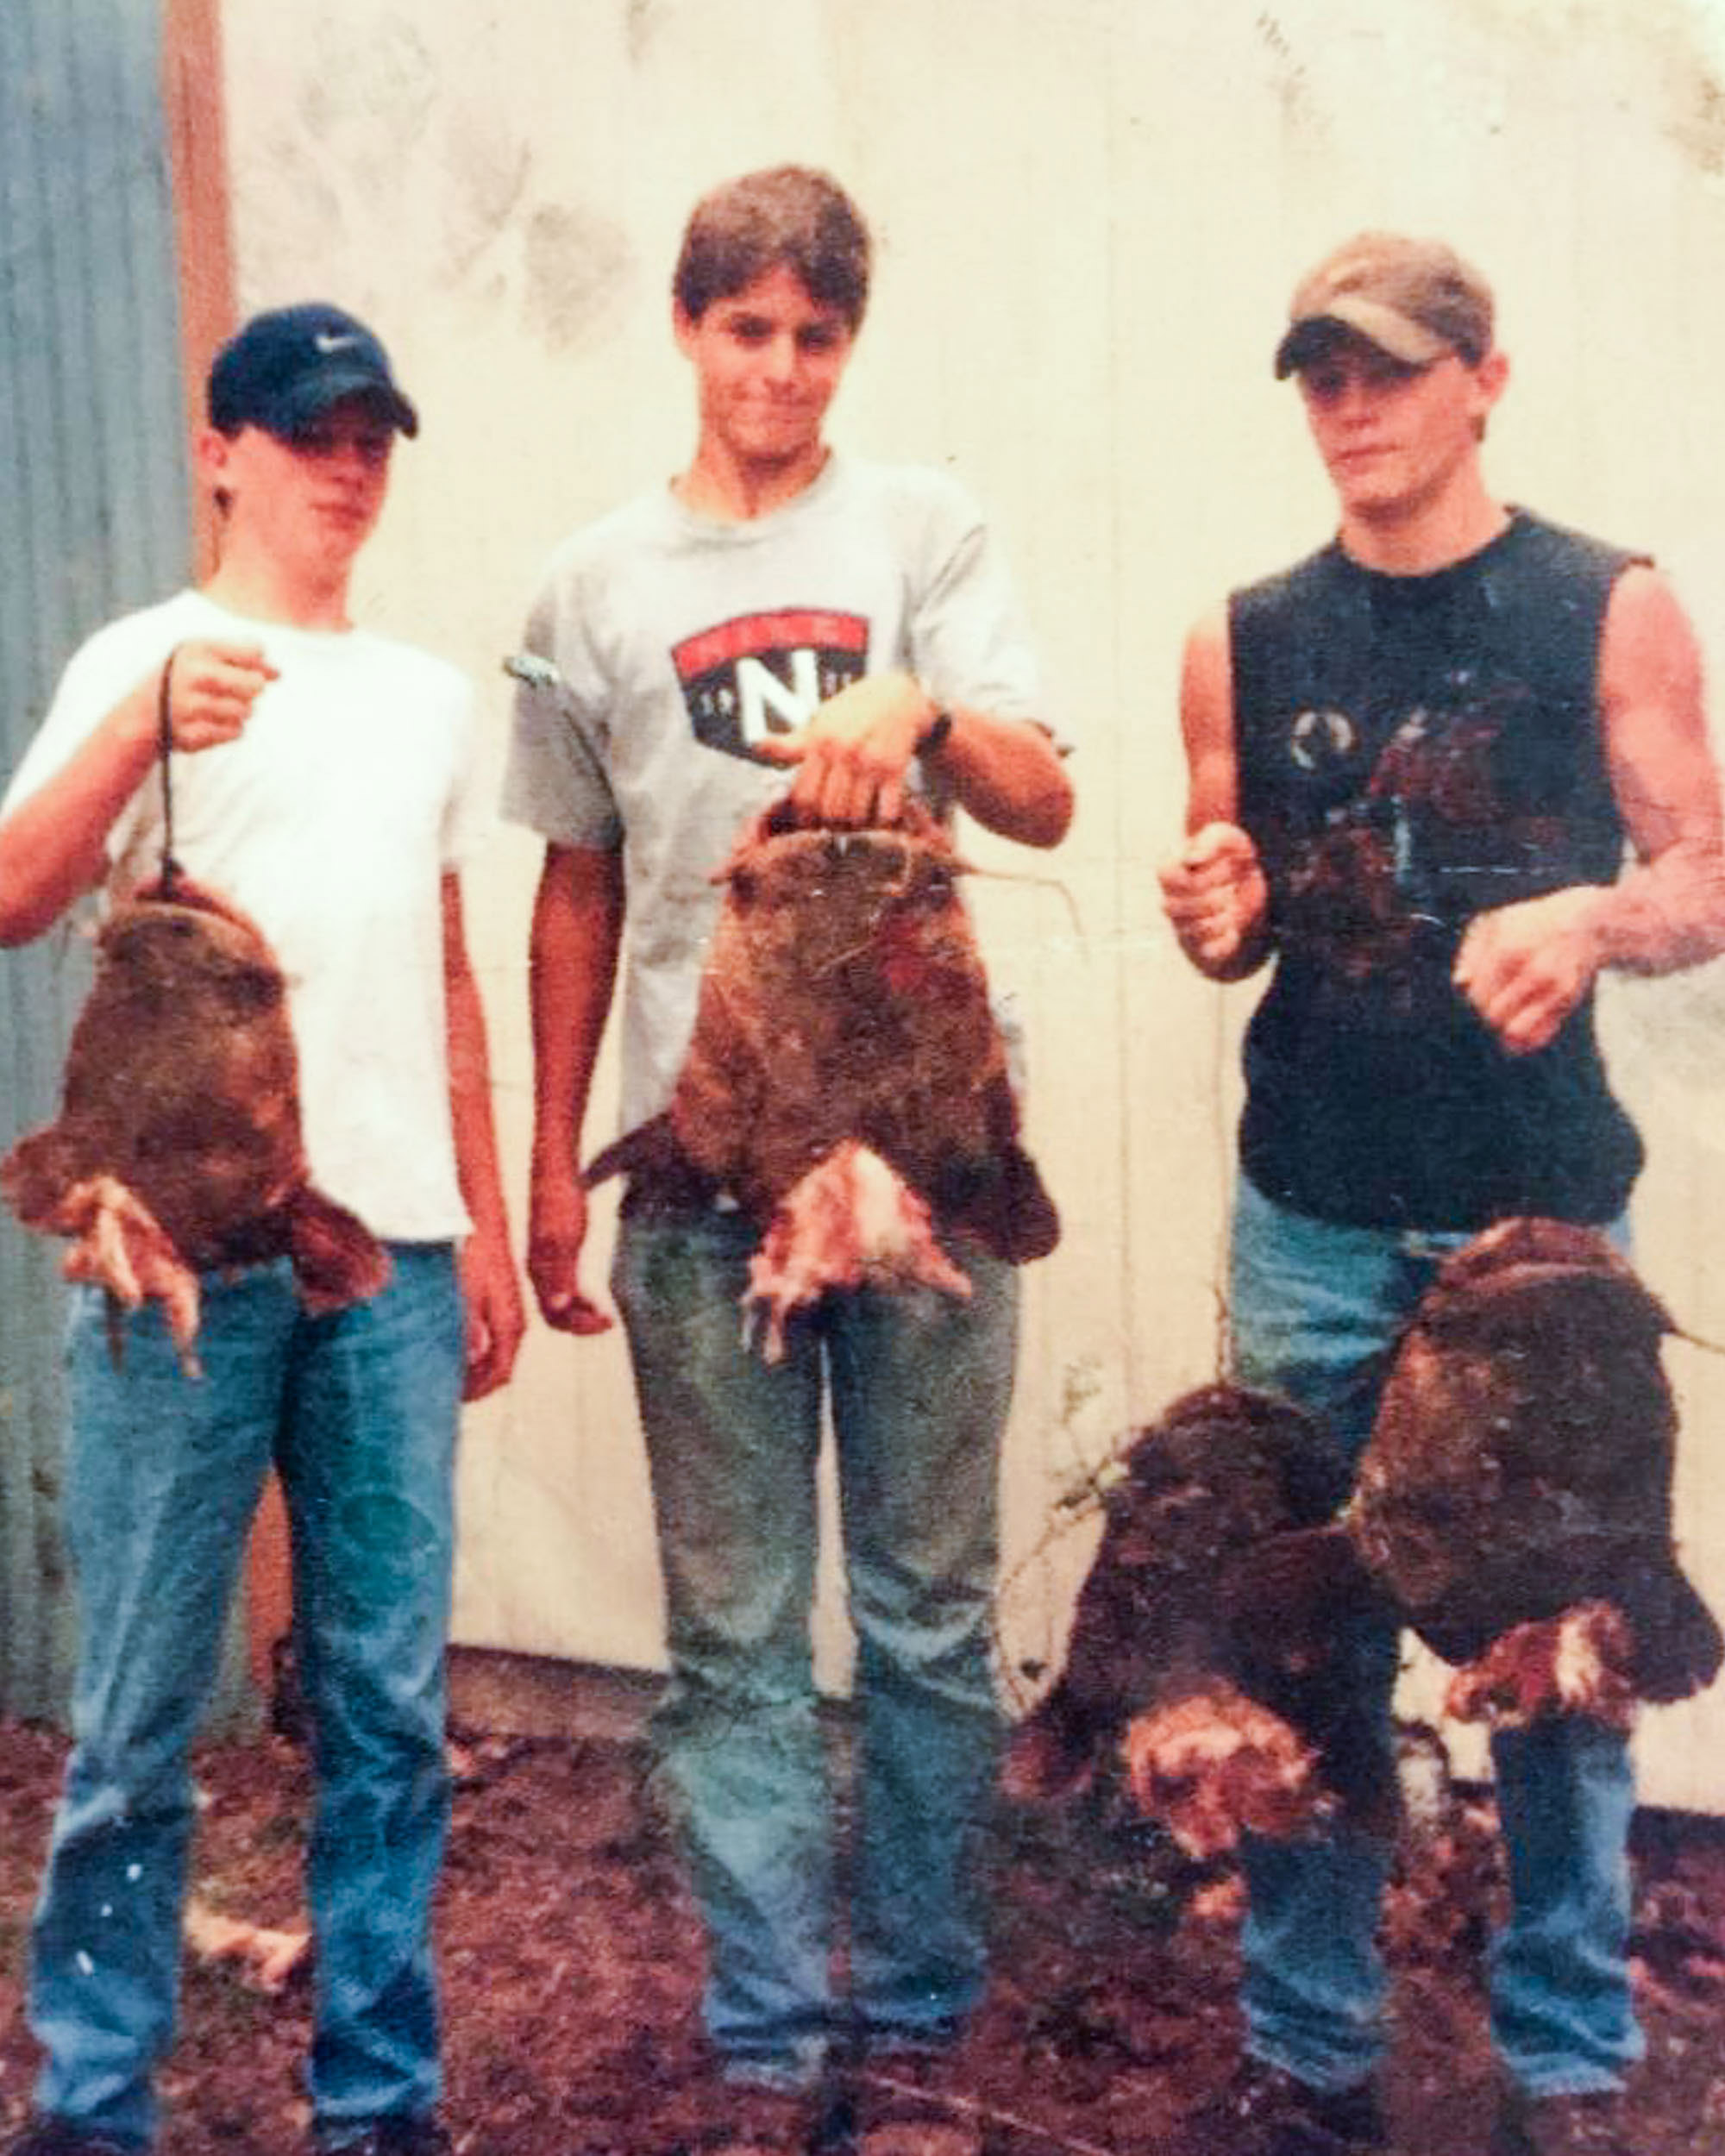 Roddy (center) and Darrell (at right) as teenagers in Decatur, Texas. Photo courtesy of Roddy Pippin.